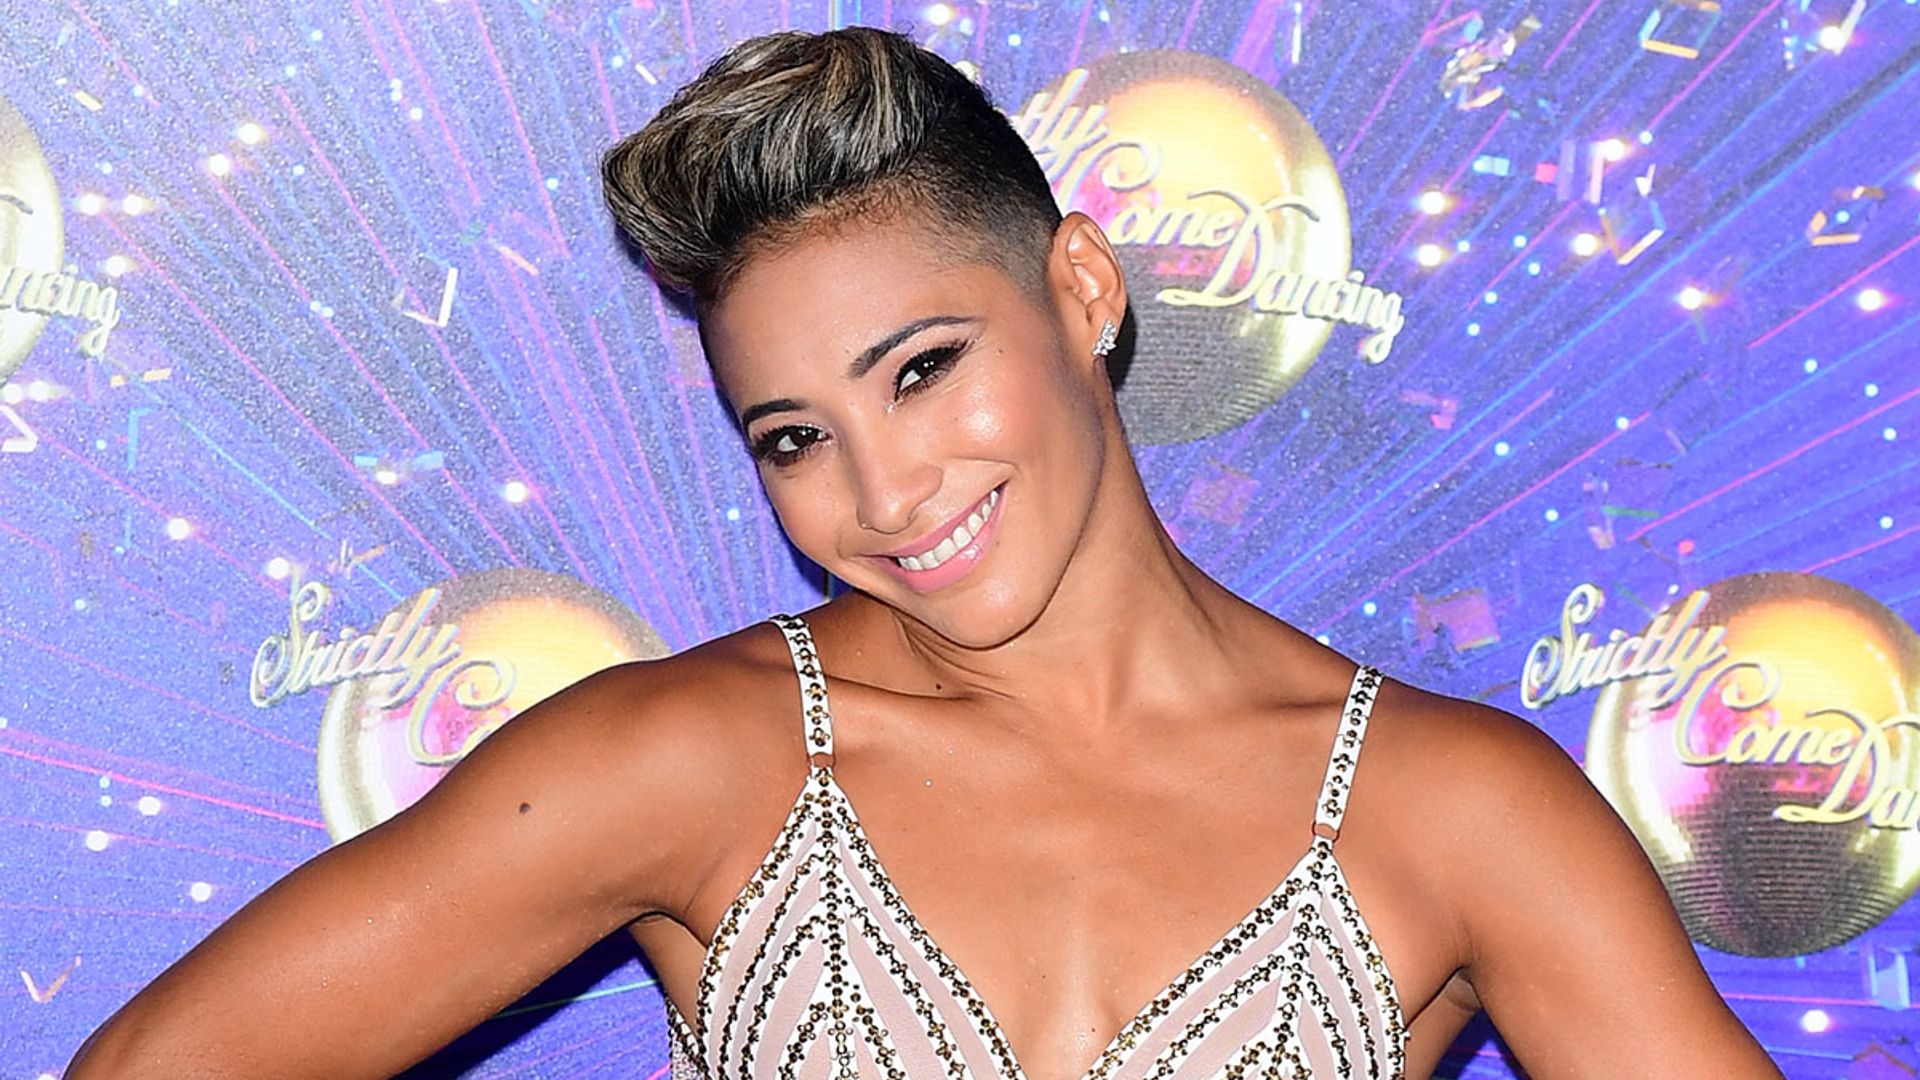 Karen Hauer shares 4-minute workout anyone can do at home - watch